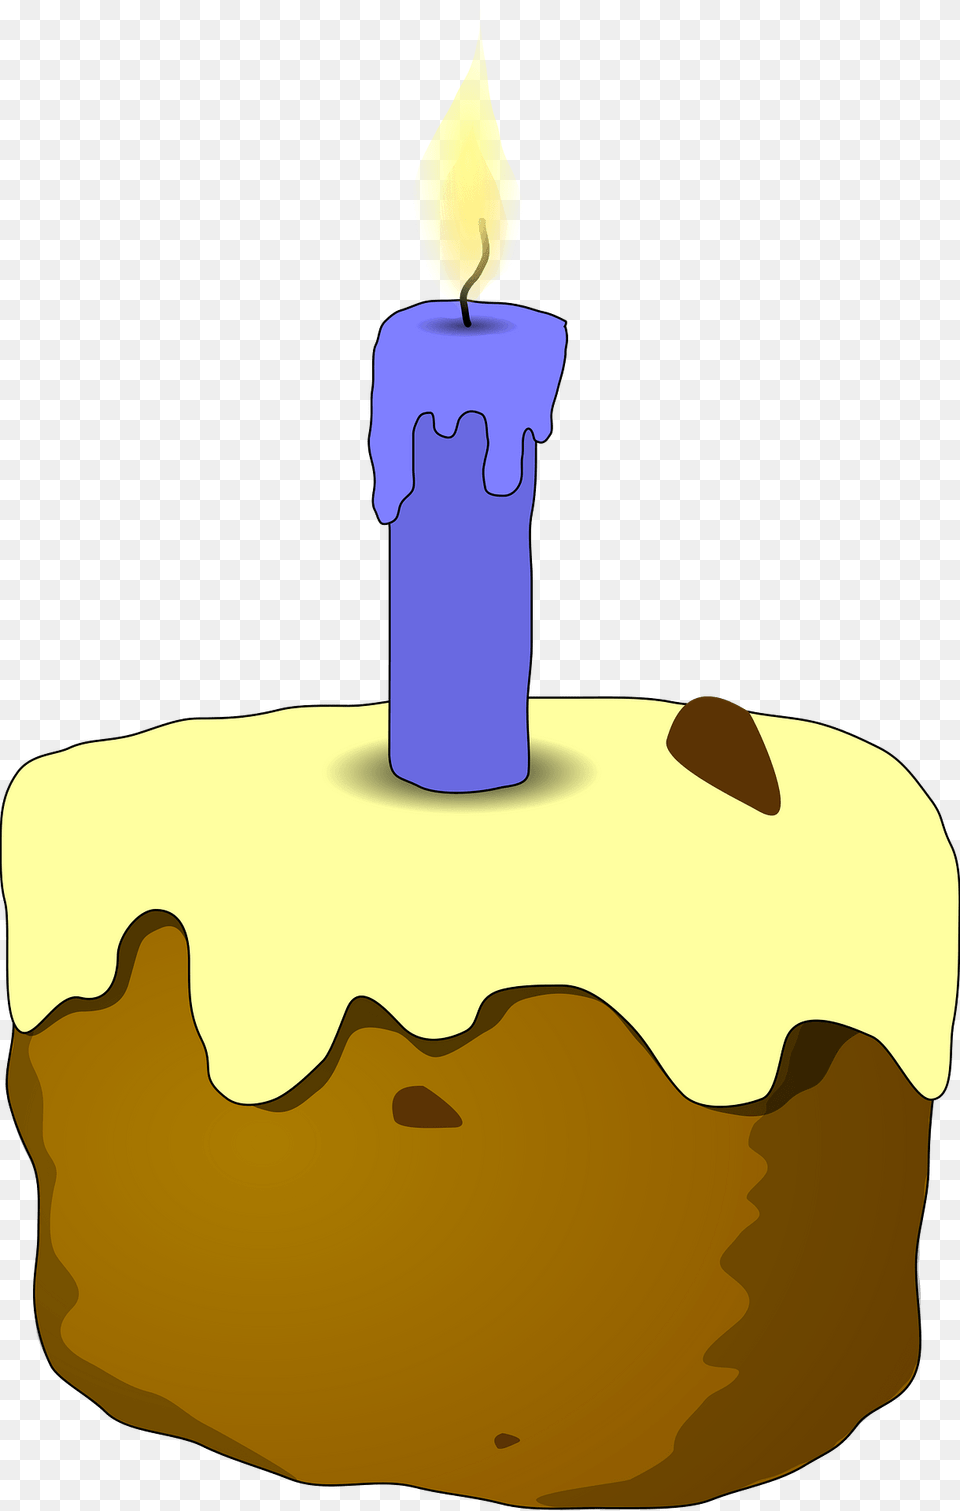 Cake And Candle Clipart, Dessert, Food, Birthday Cake, Cream Png